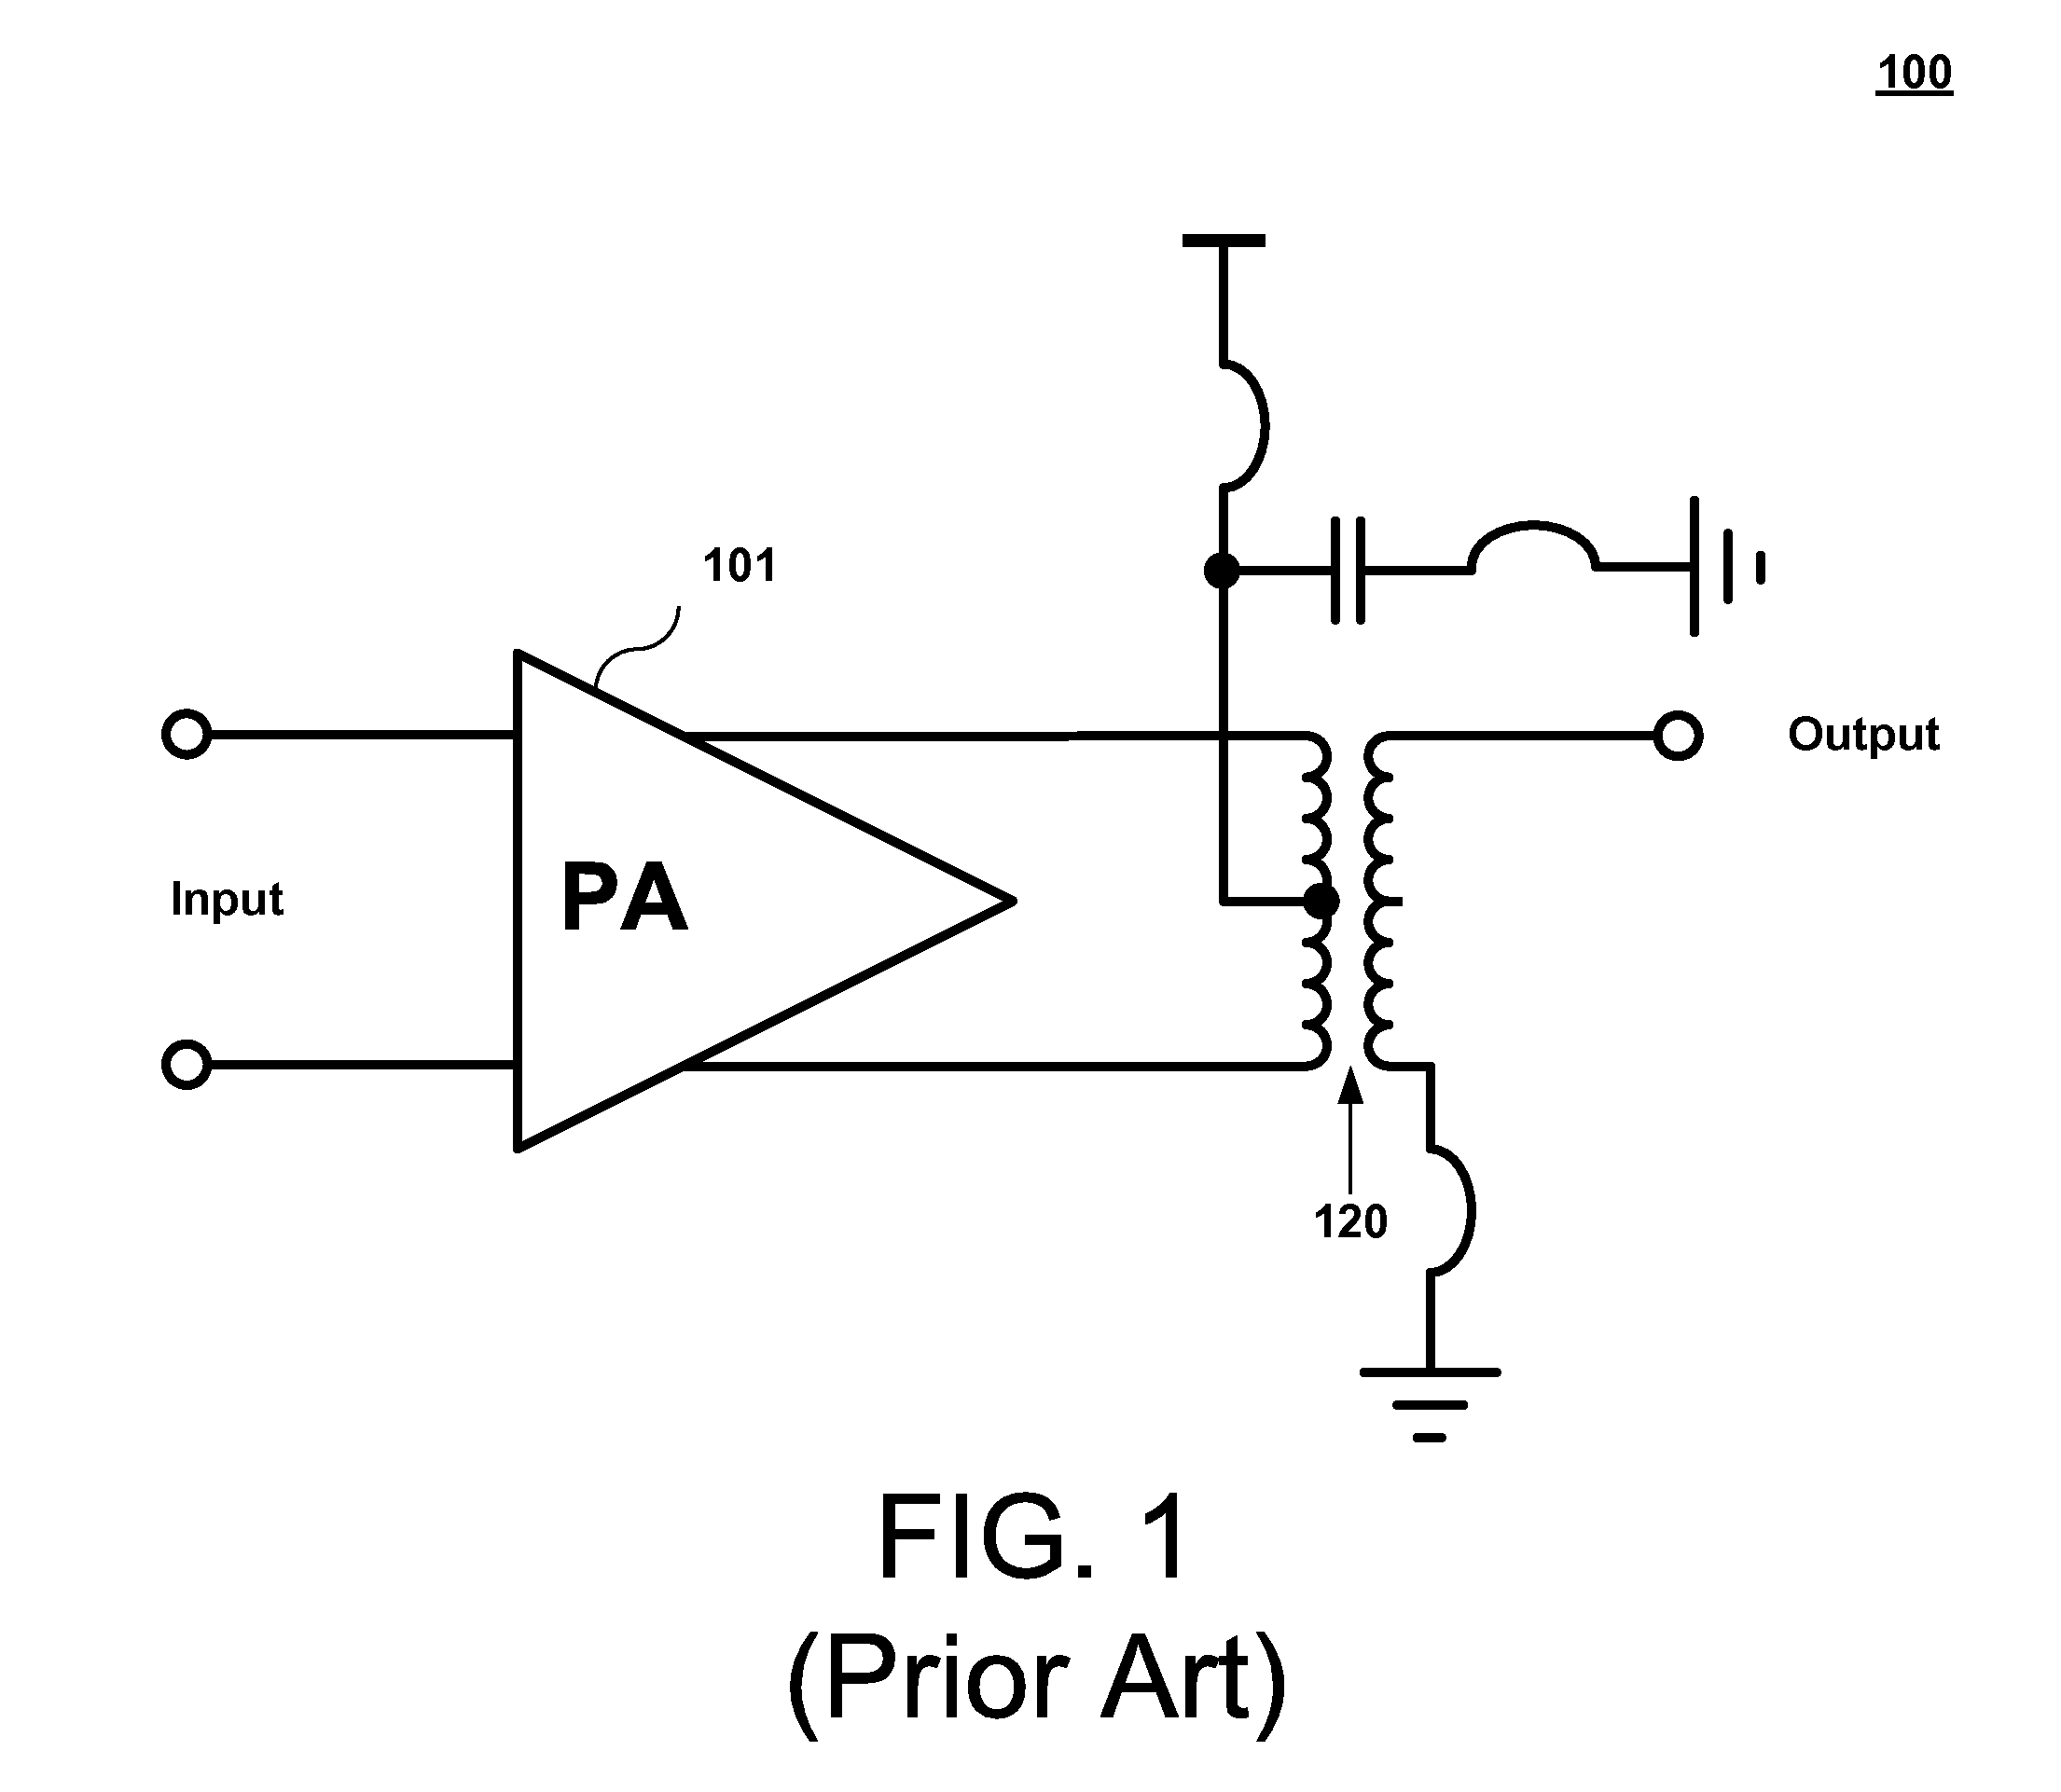 Balun function with reference enhancement in single-ended port